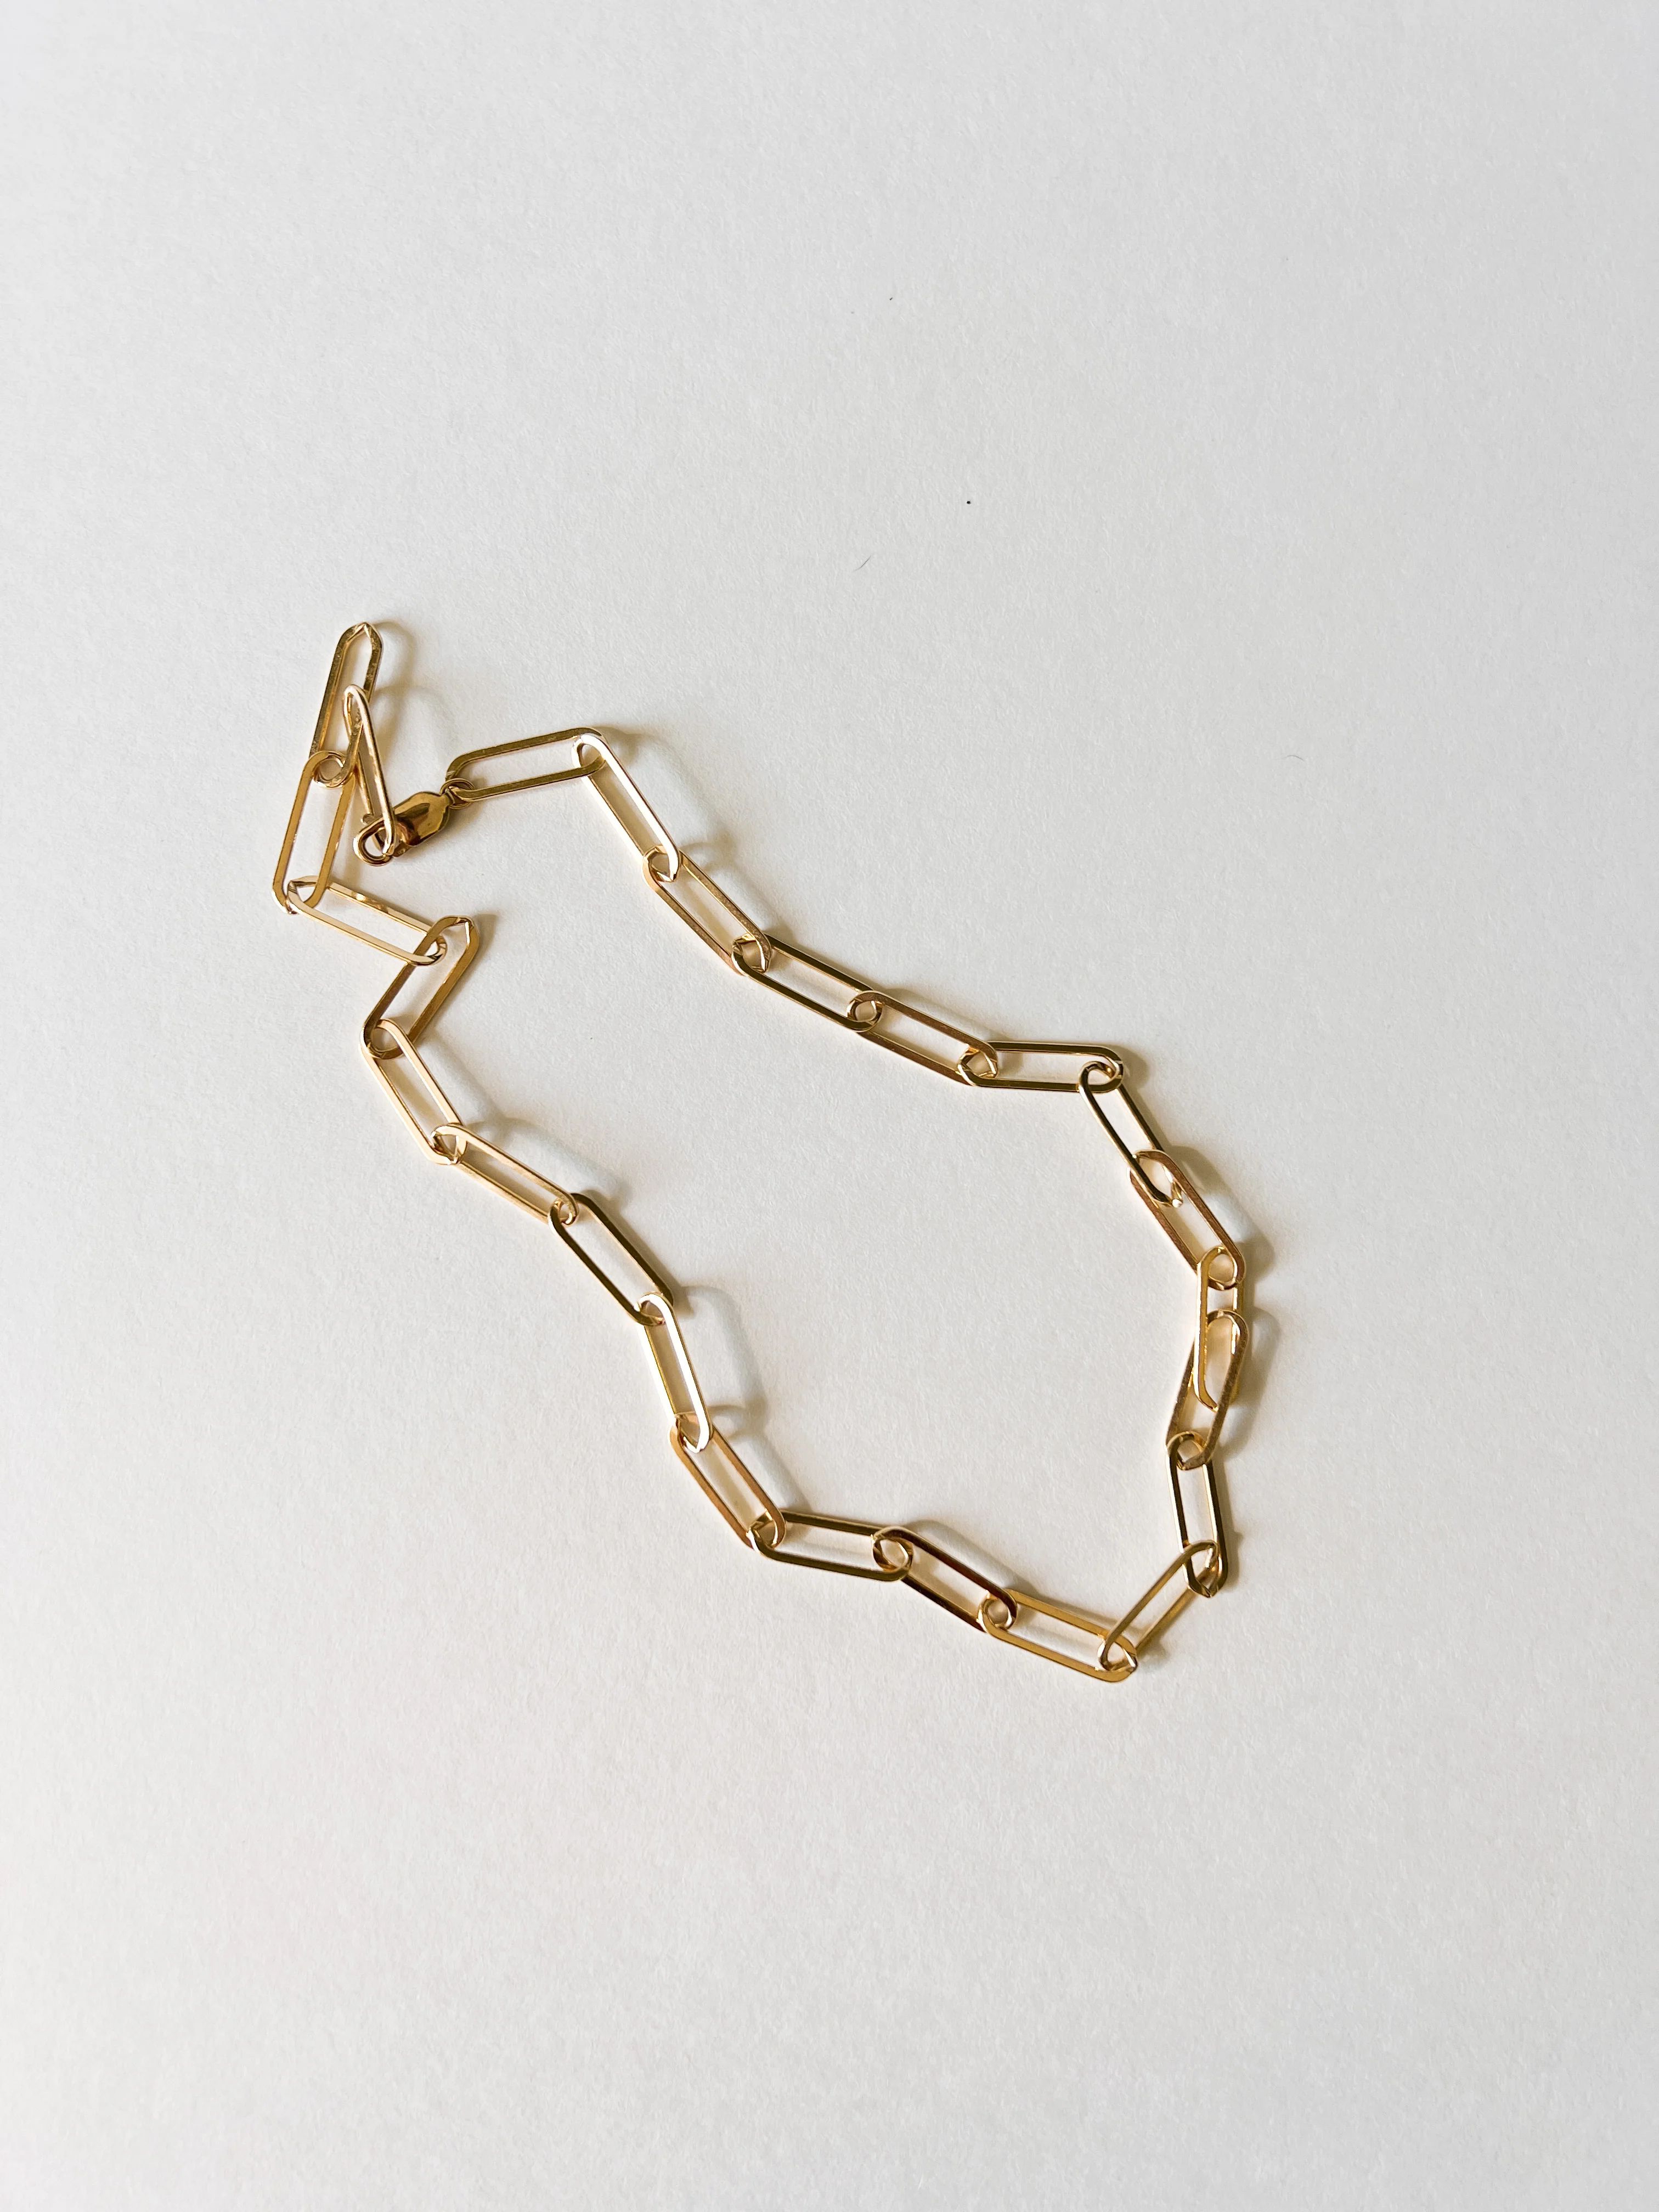 Gold-Filled Chunky Link Chain | Natalie Borton